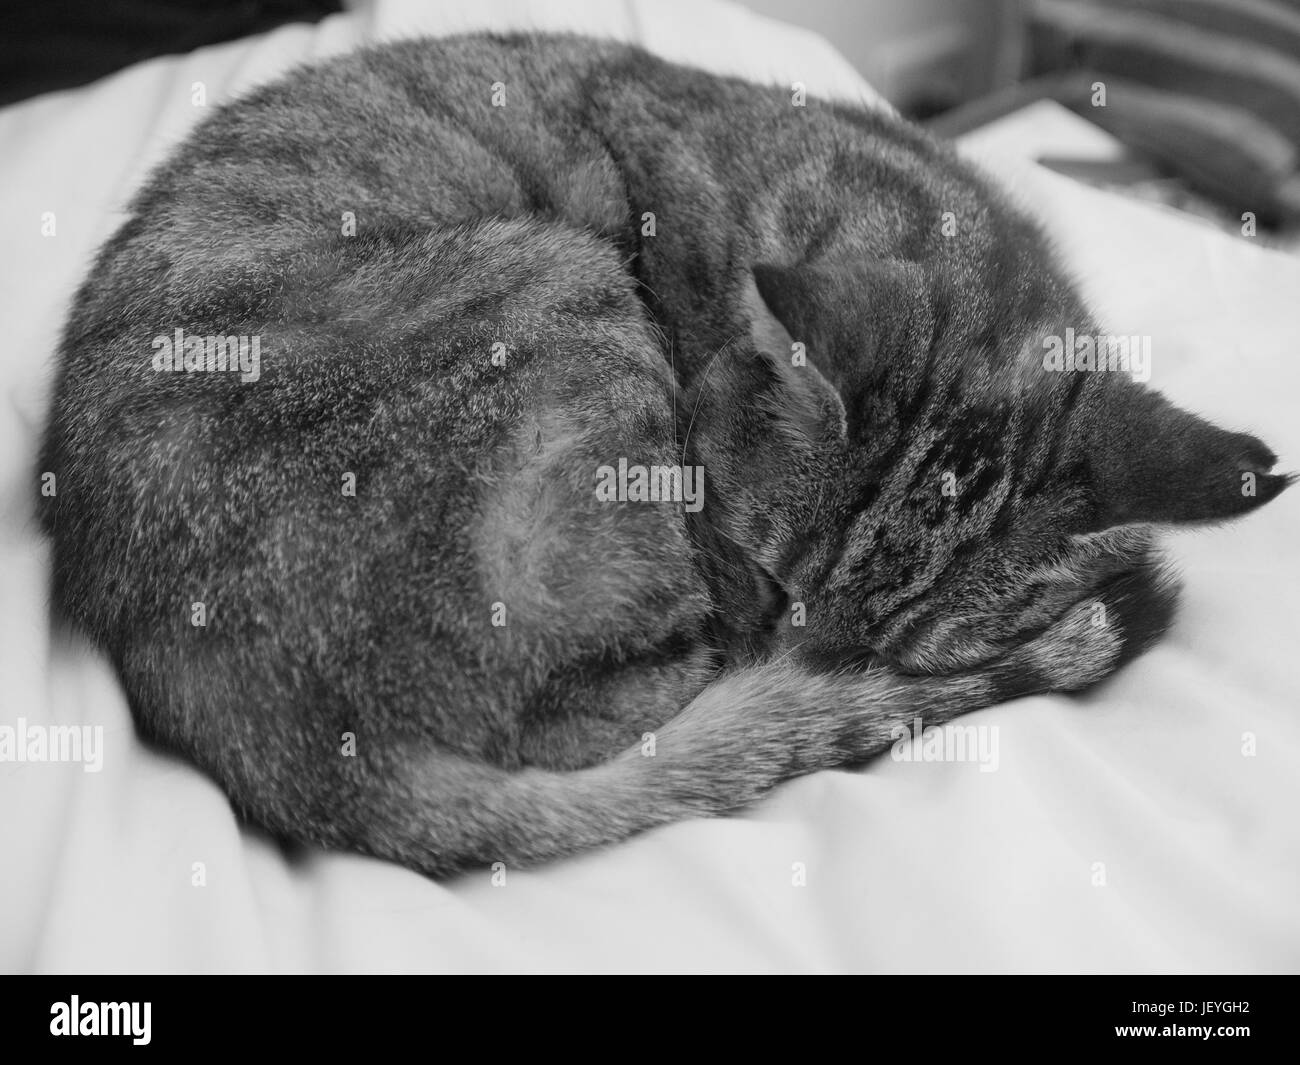 Cat curled up sleeping black and white. Stock Photo